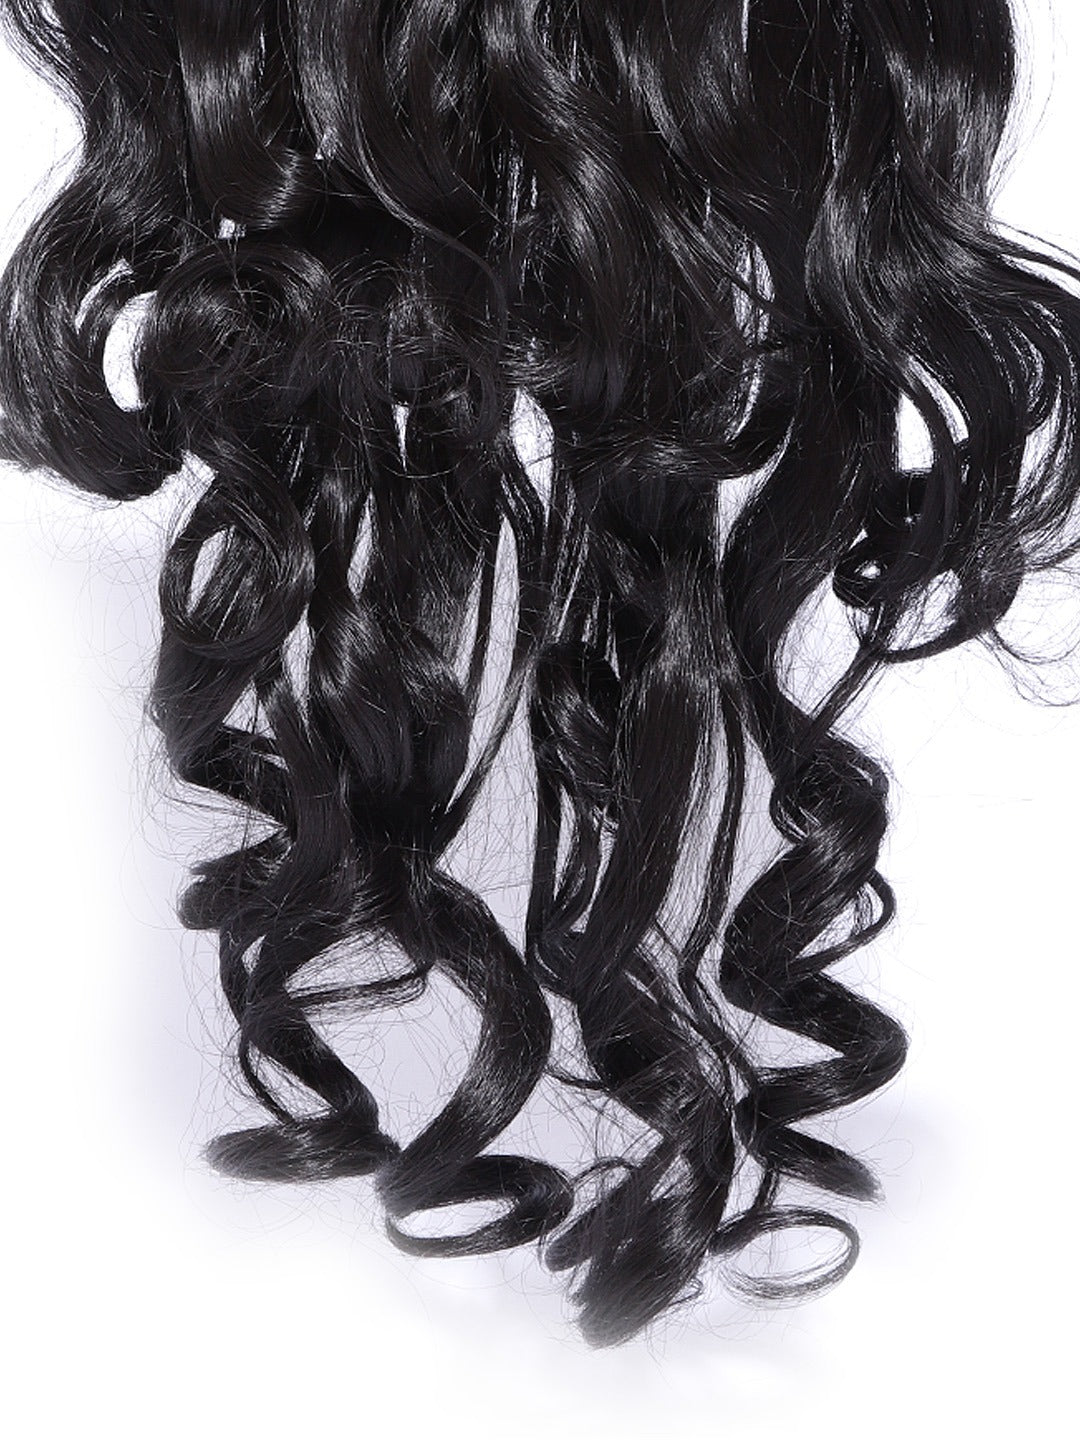 Blueberry Dark Brown Curly/Wavy premium Hair Extension with 5 clips